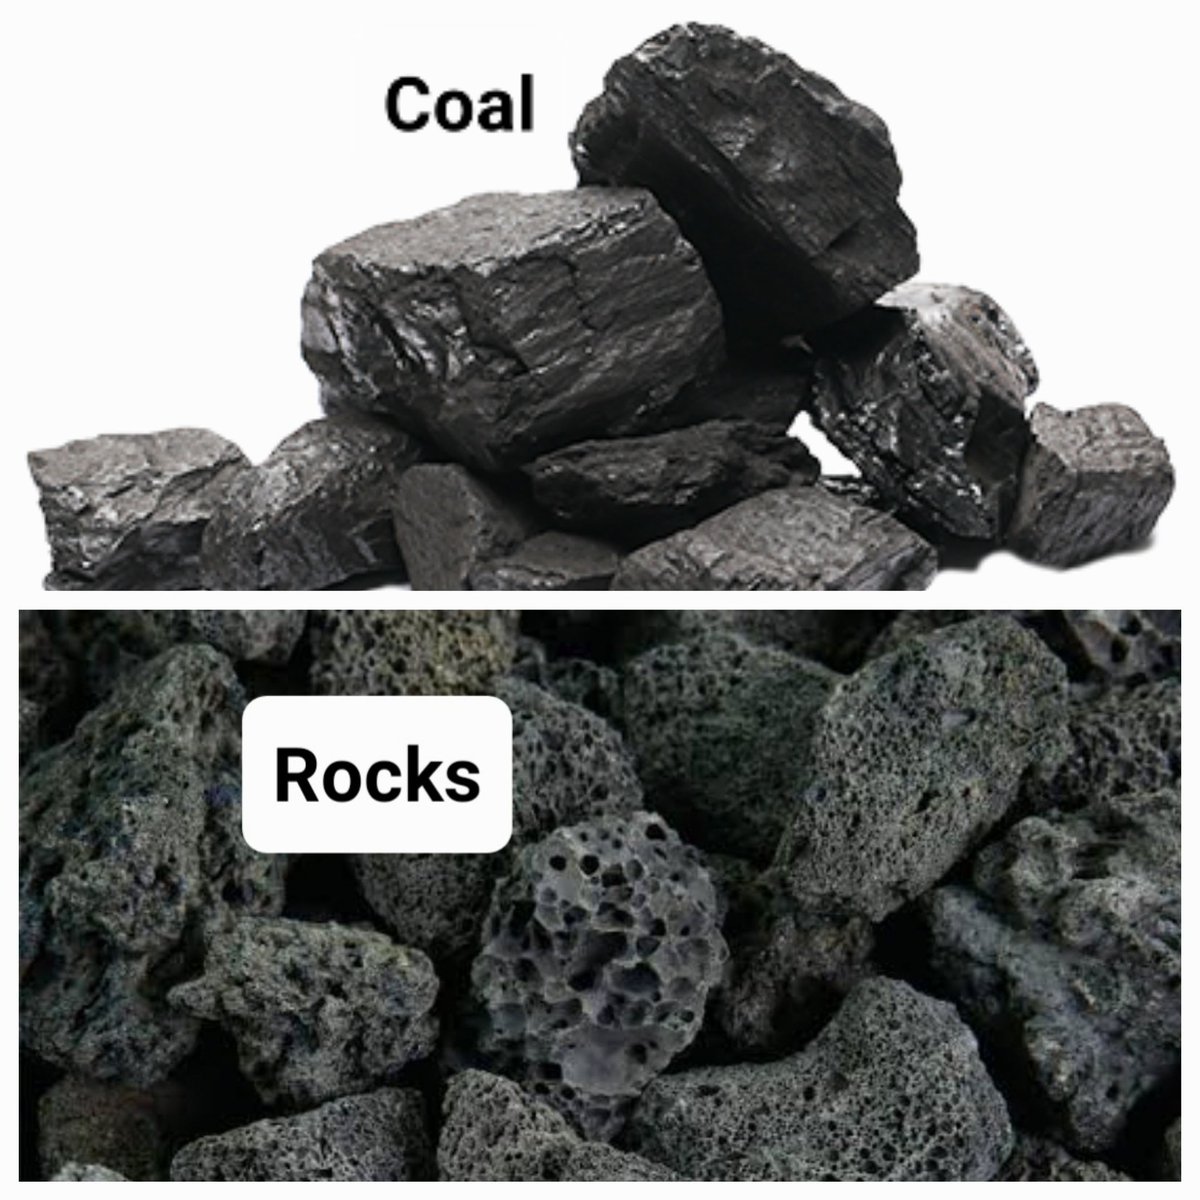 3 Coal syndicates arrested in Mpumalanga for supplying Eskom with rocks instead of coal, the results of these criminal conduct has led to widespread loadshedding across SA. Hawks are aiming to make more arrests